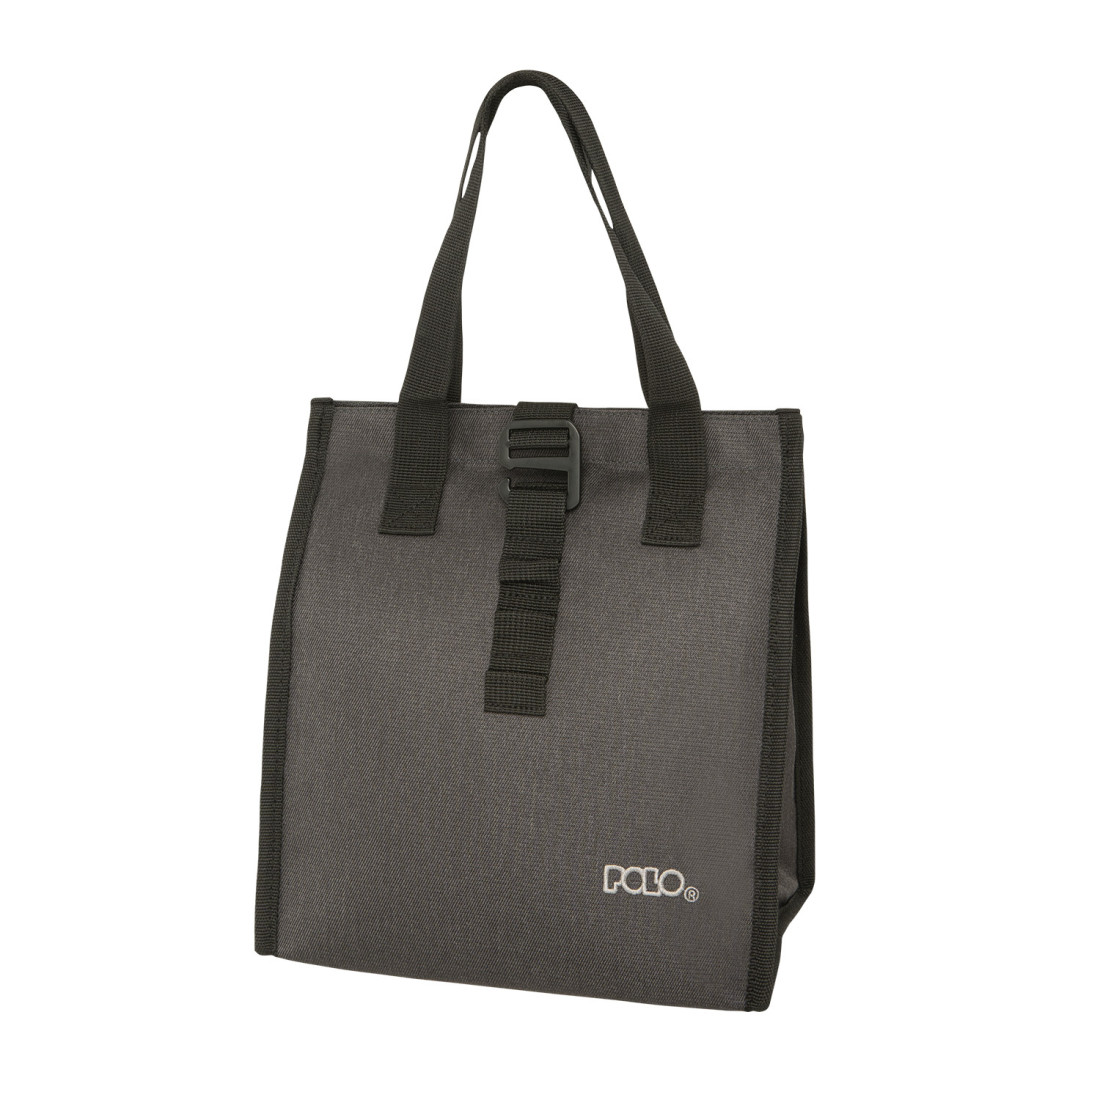 Lunch bag Office 907061- 2202 Polo